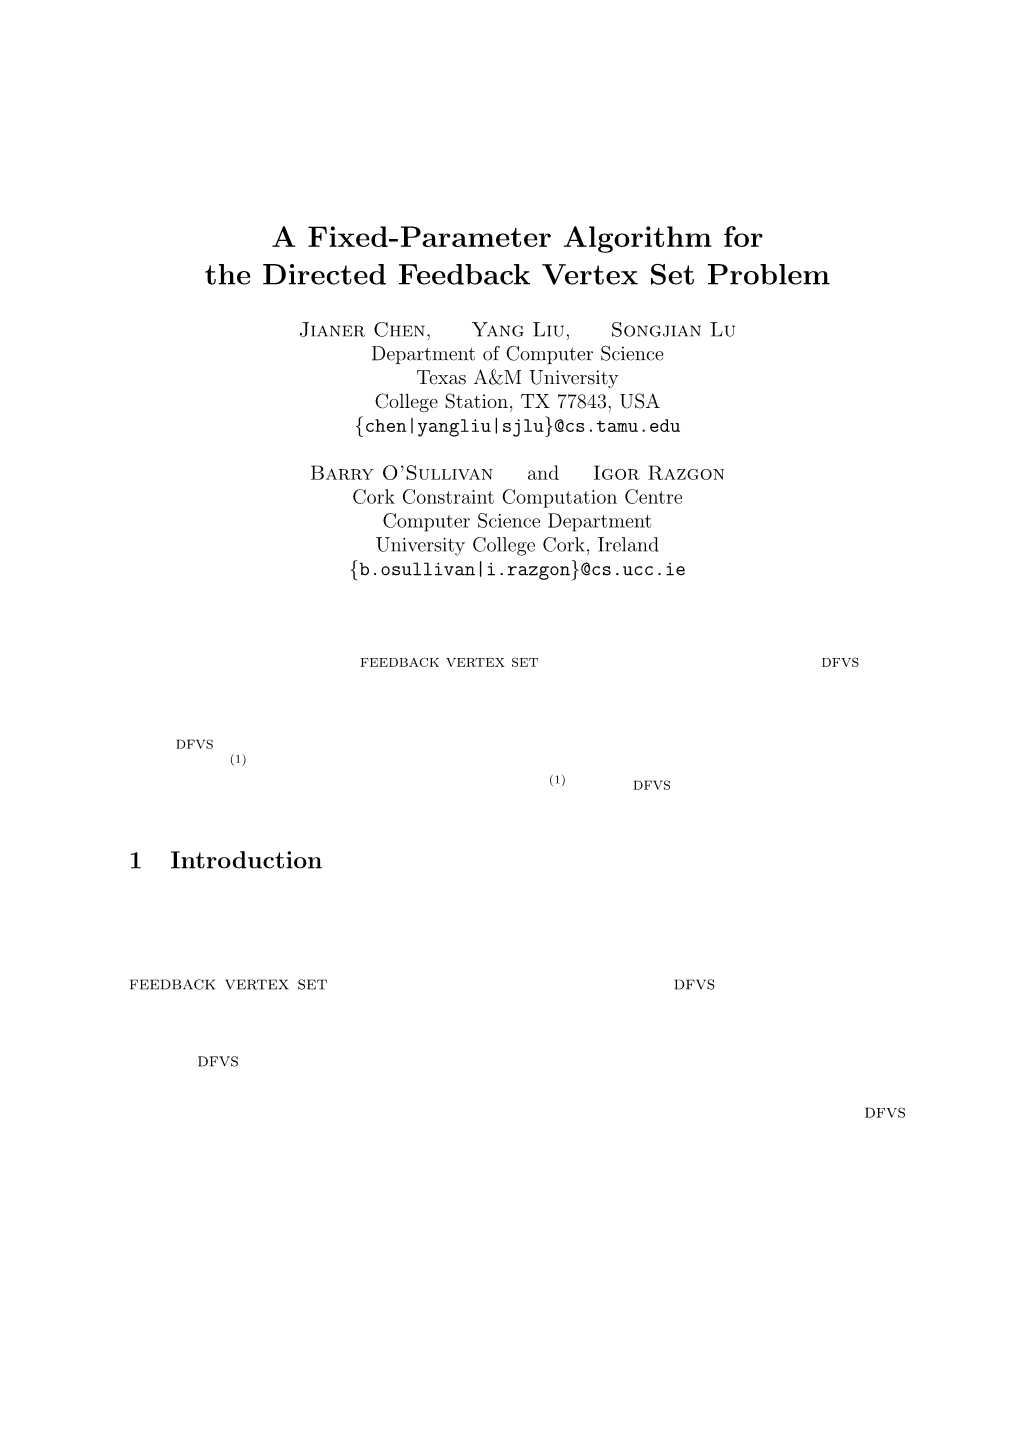 A Fixed-Parameter Algorithm for the Directed Feedback Vertex Set Problem